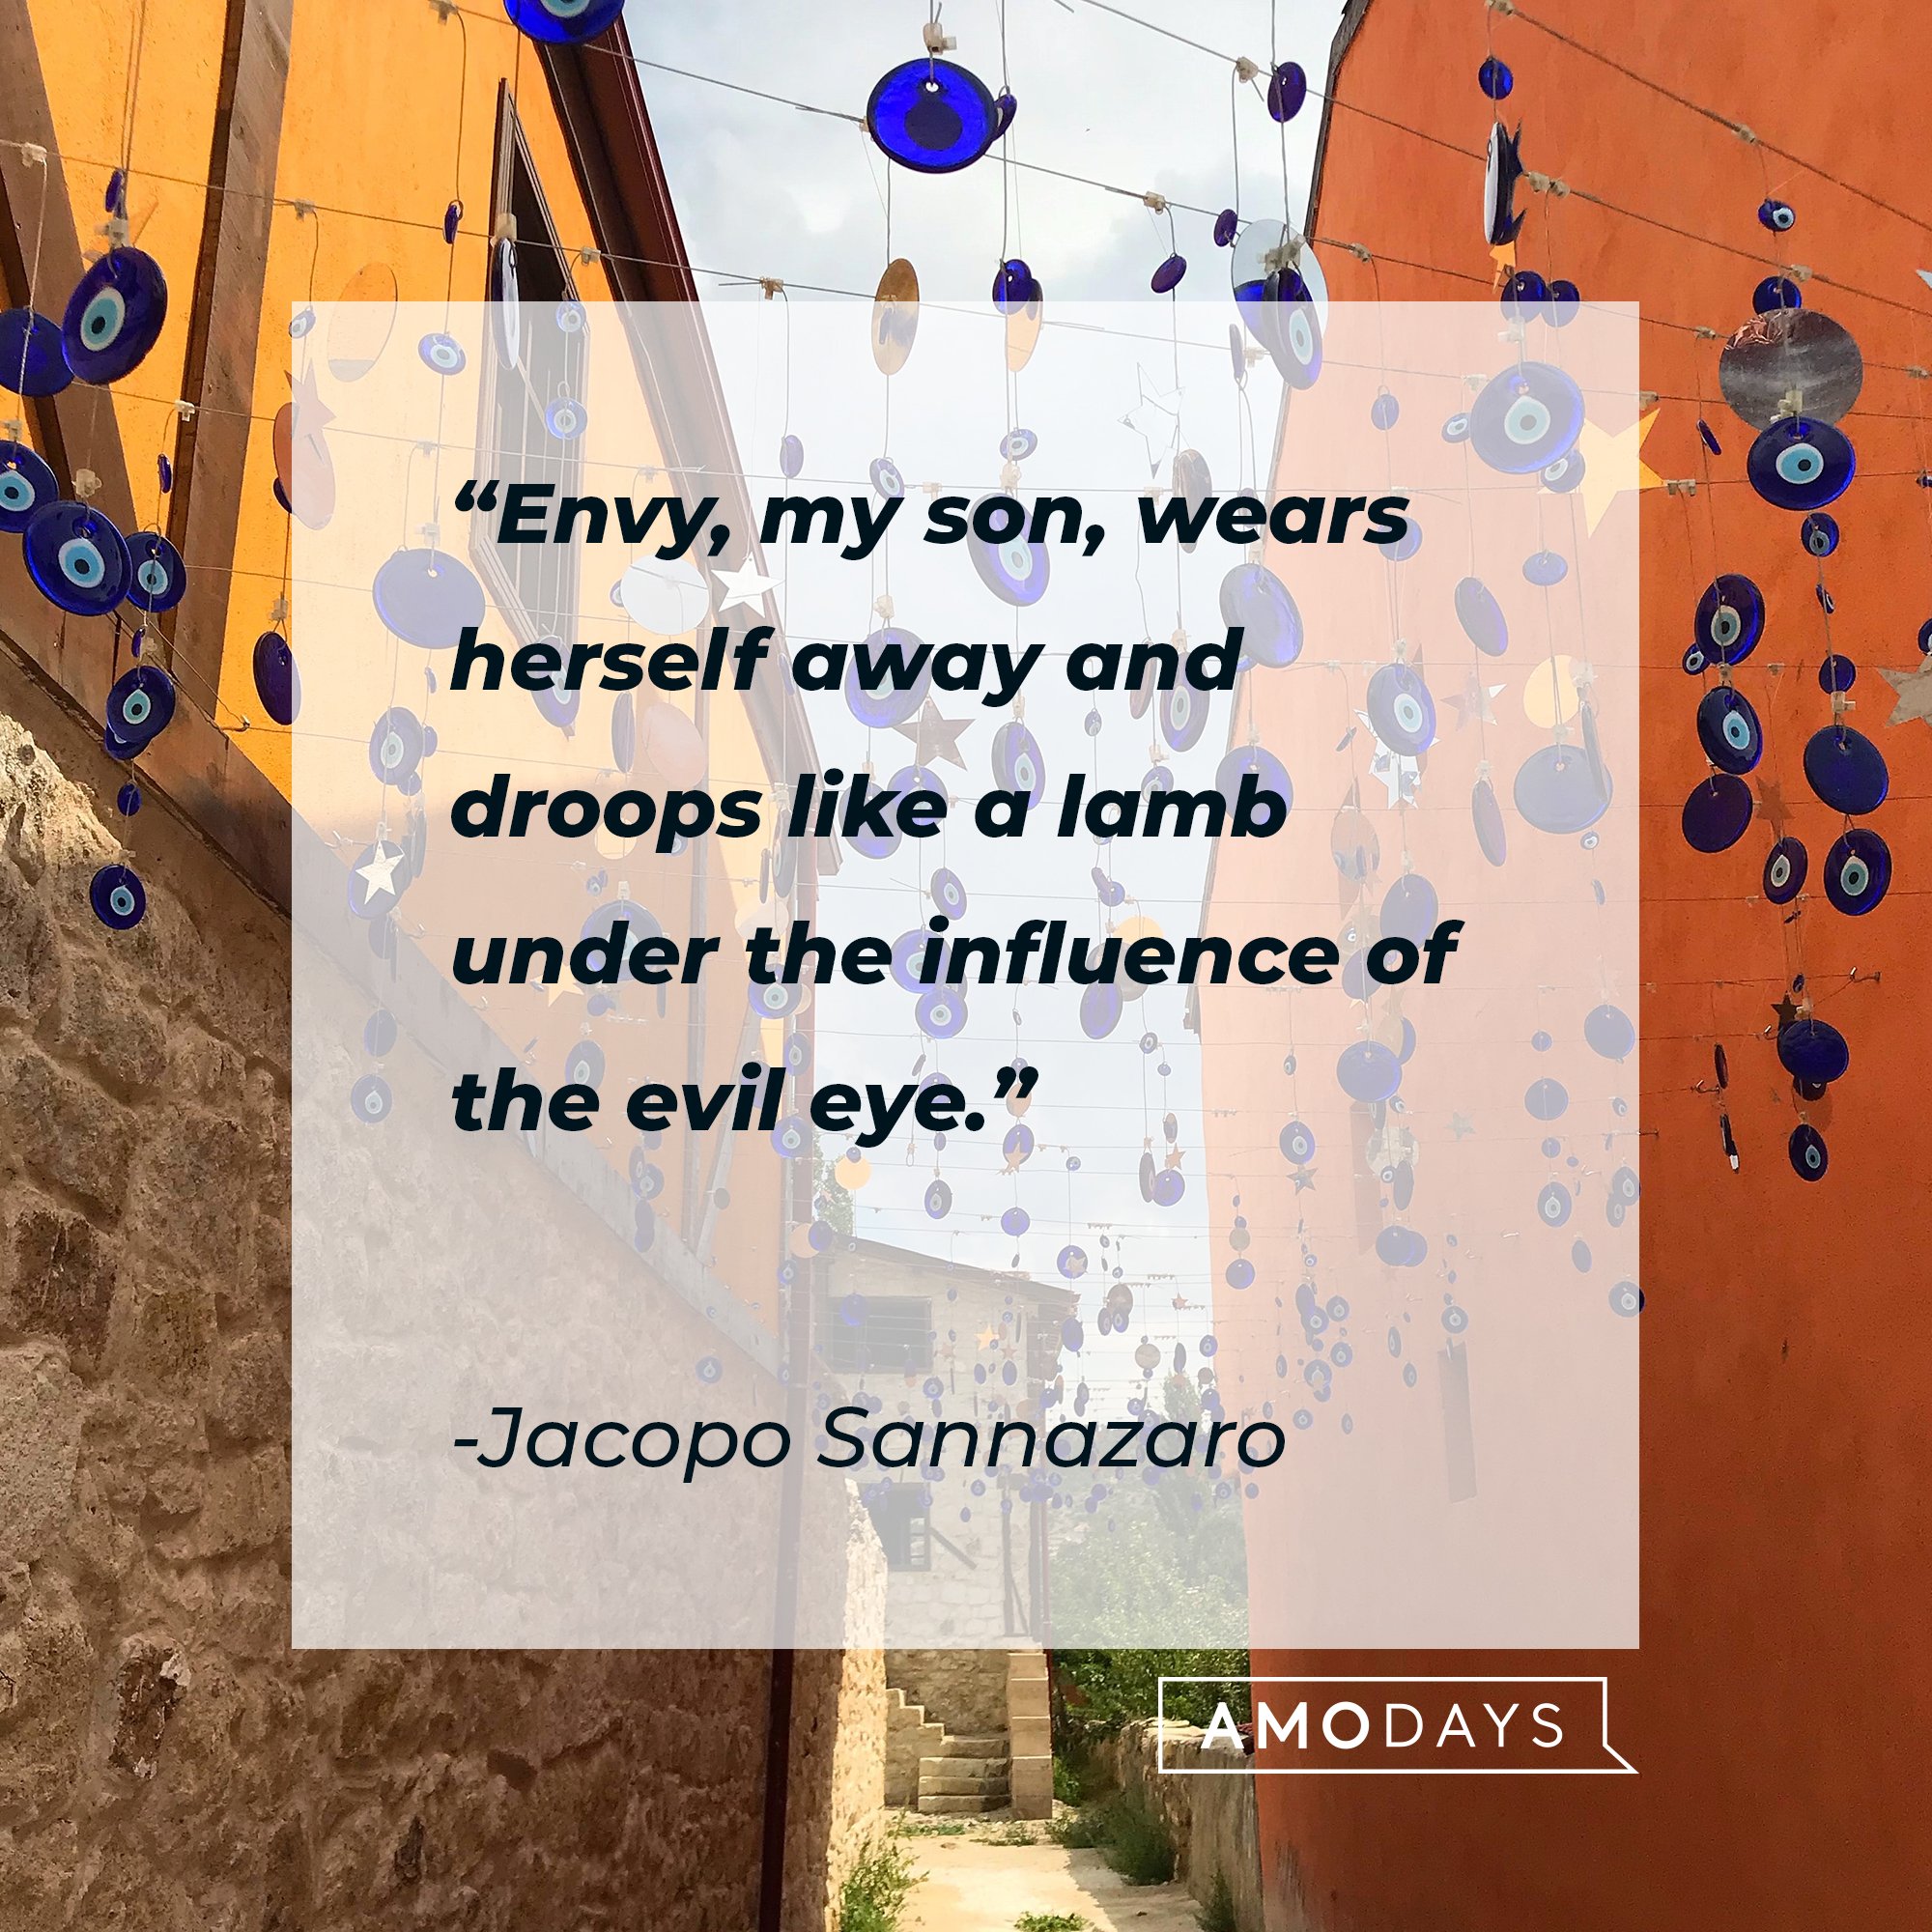 Jacopo Sannazaro’s quote: "Envy, my son, wears herself away and droops like a lamb under the influence of the evil eye." | Image: AmoDays